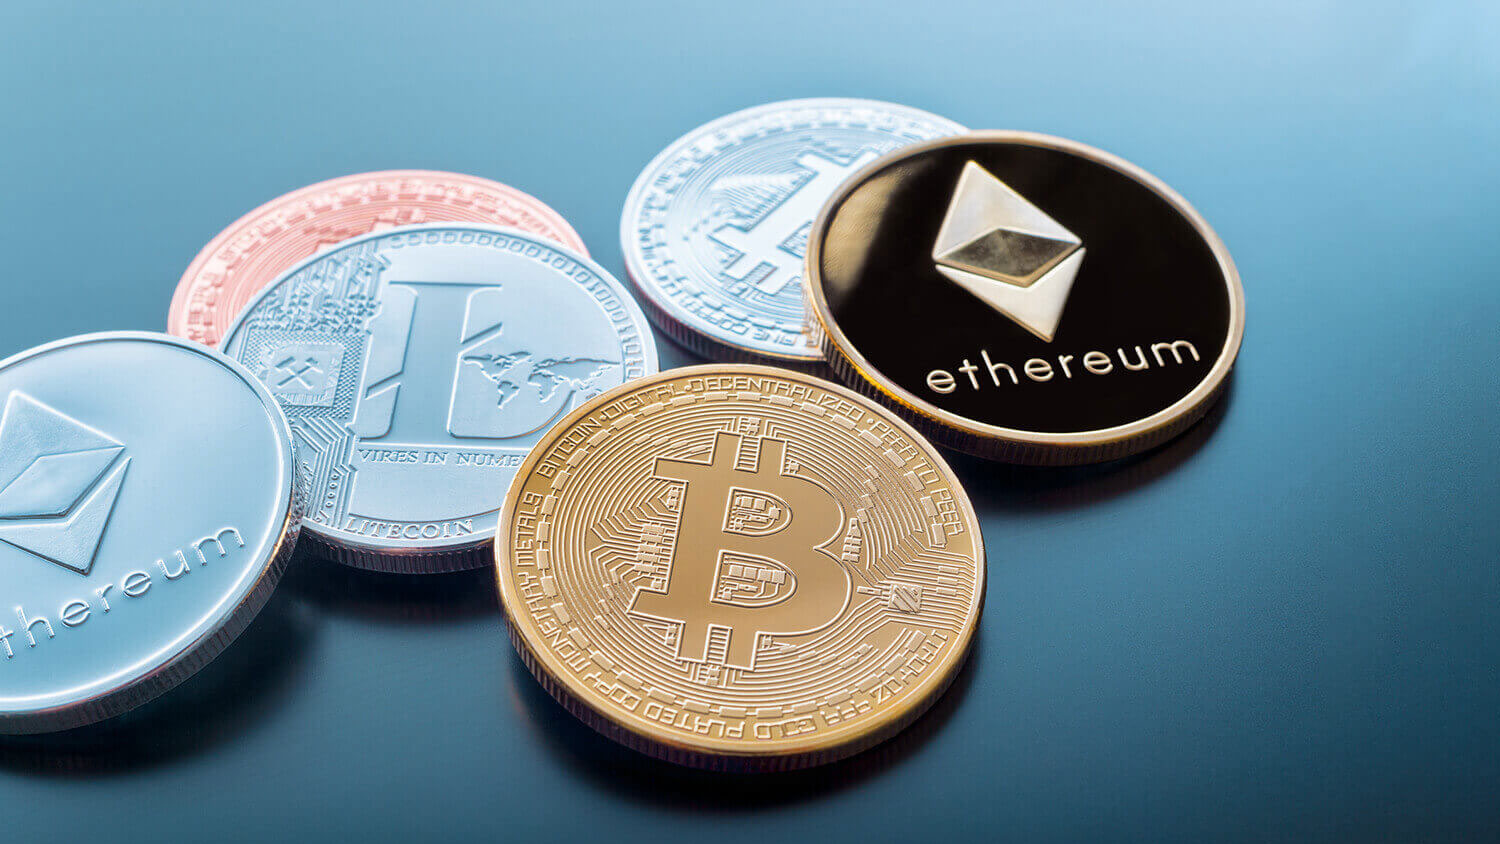 a few coins with crypto logos on them